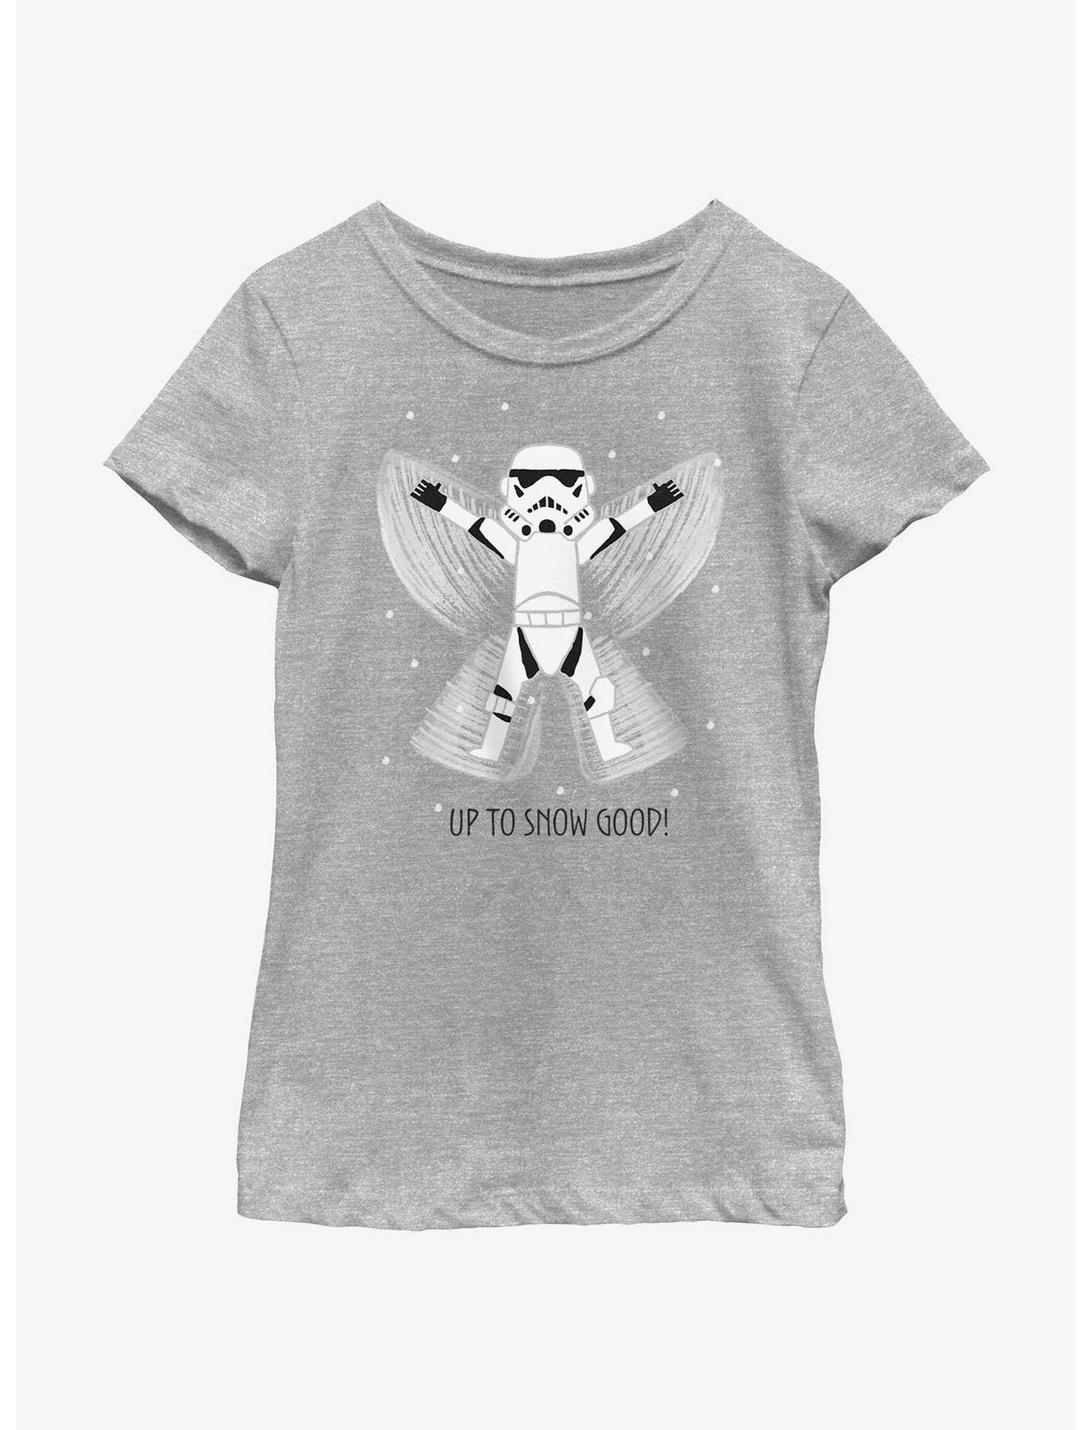 Star Wars Storm Trooper Up To Snow Good Youth Girls T-Shirt, ATH HTR, hi-res